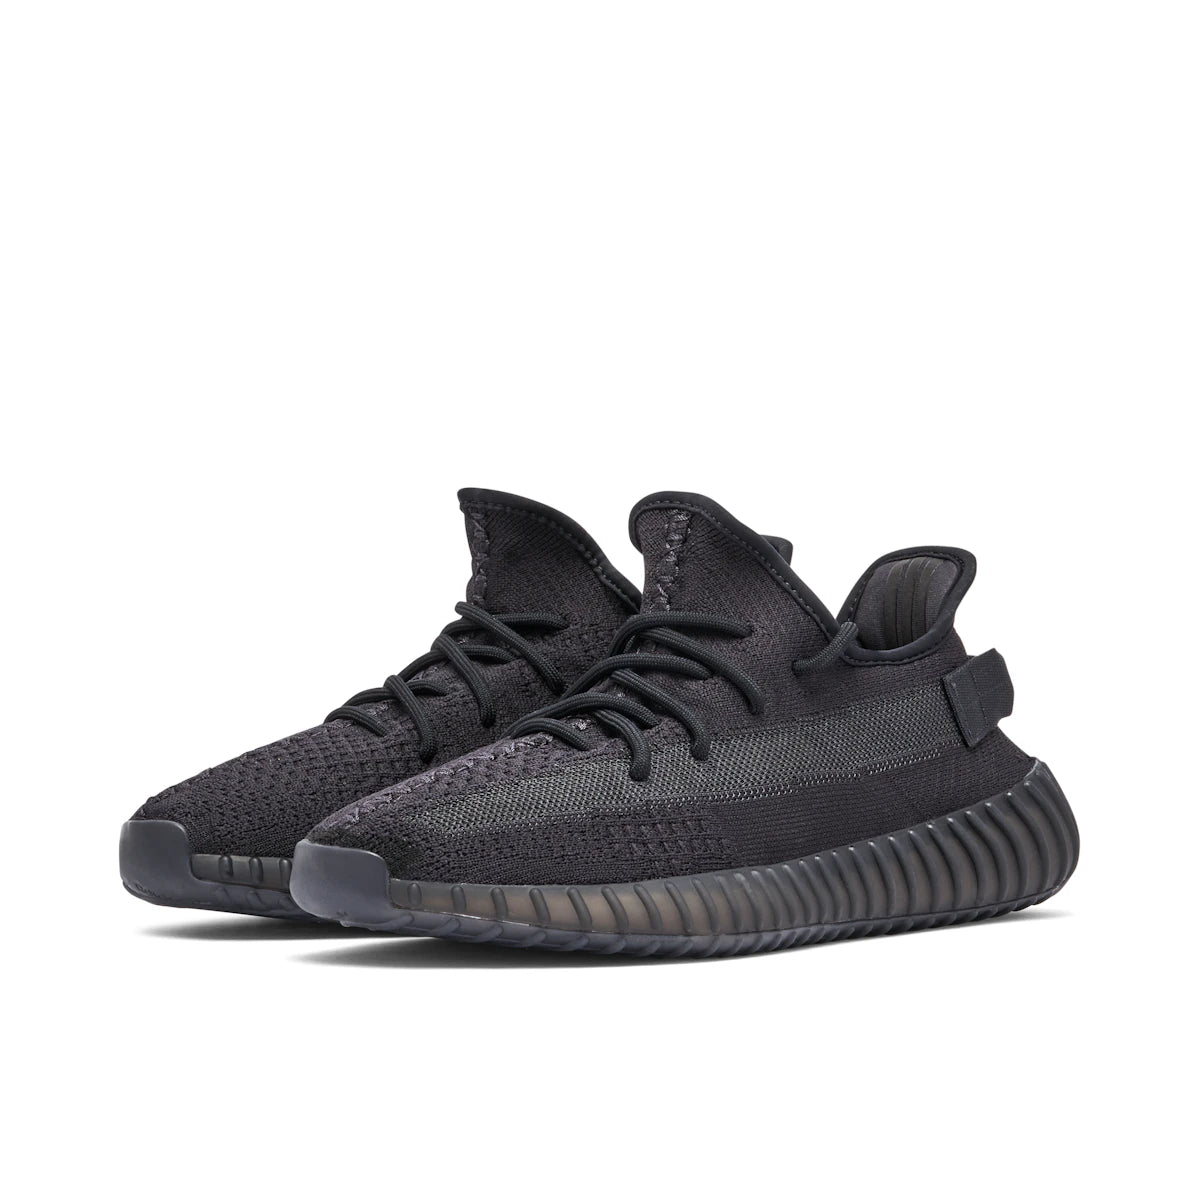 Adidas Yeezy Boost 350 V2 Onyx by Yeezy from £281.00